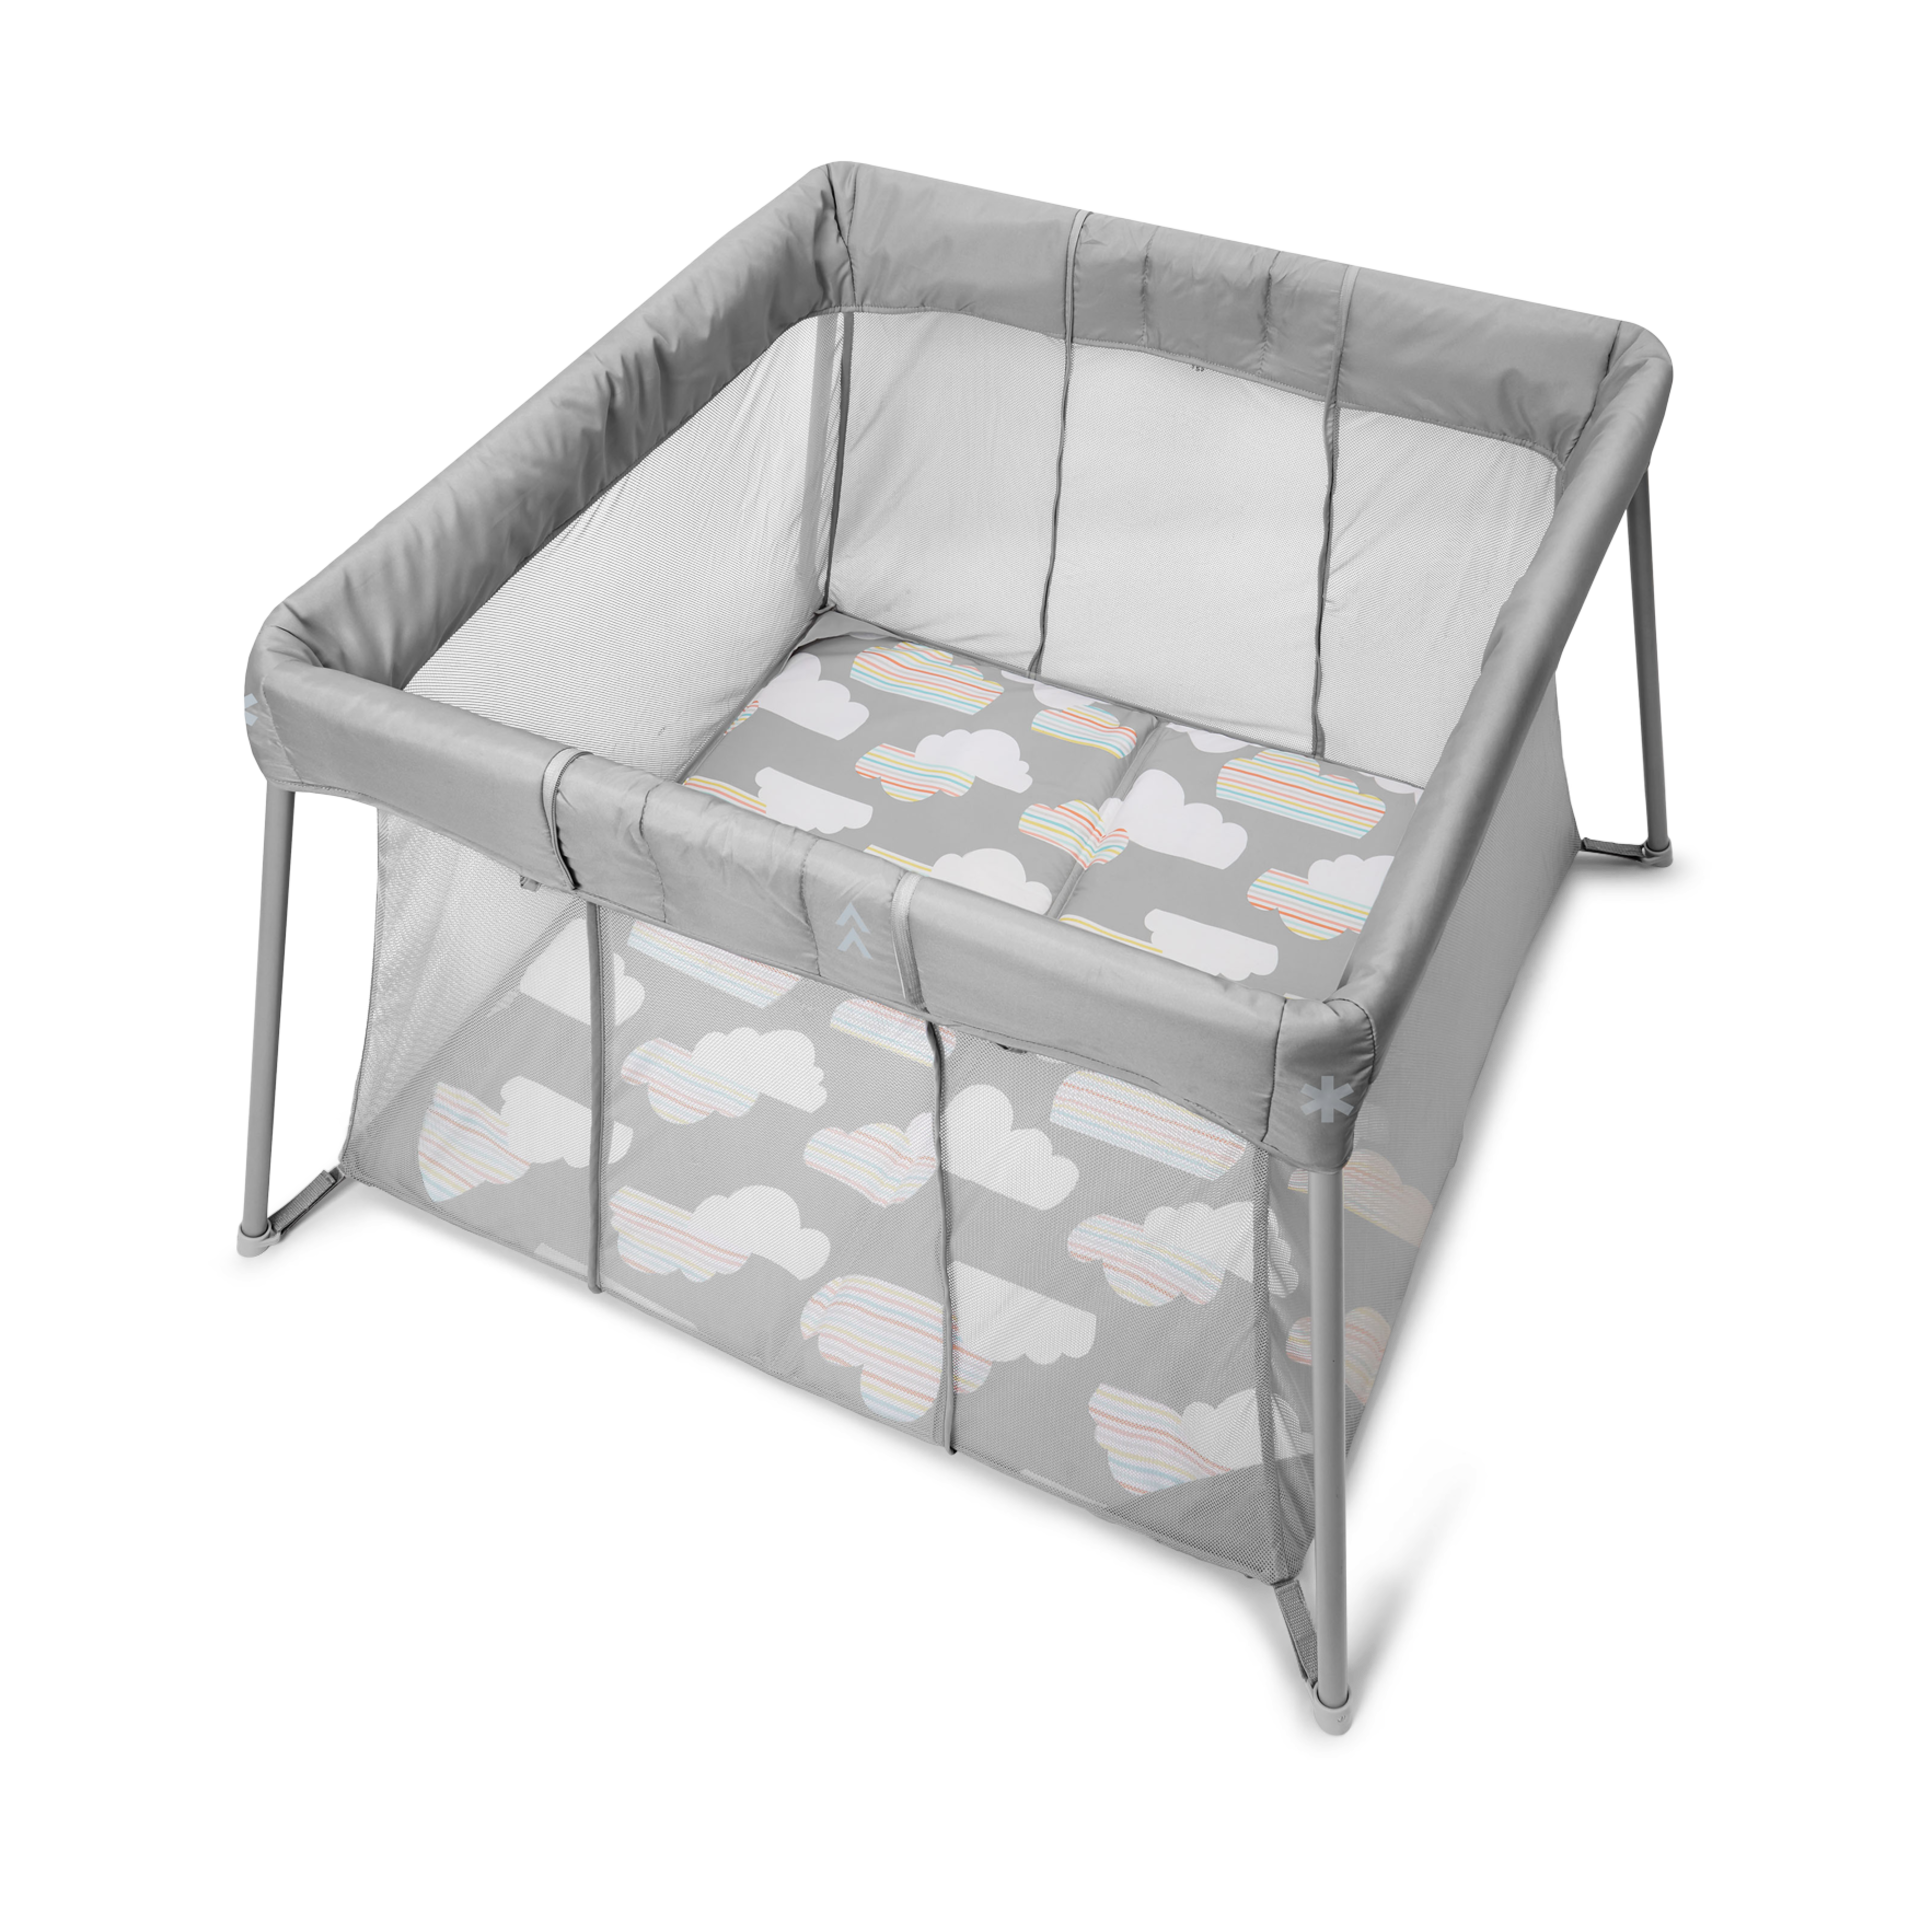 standard travel cot size